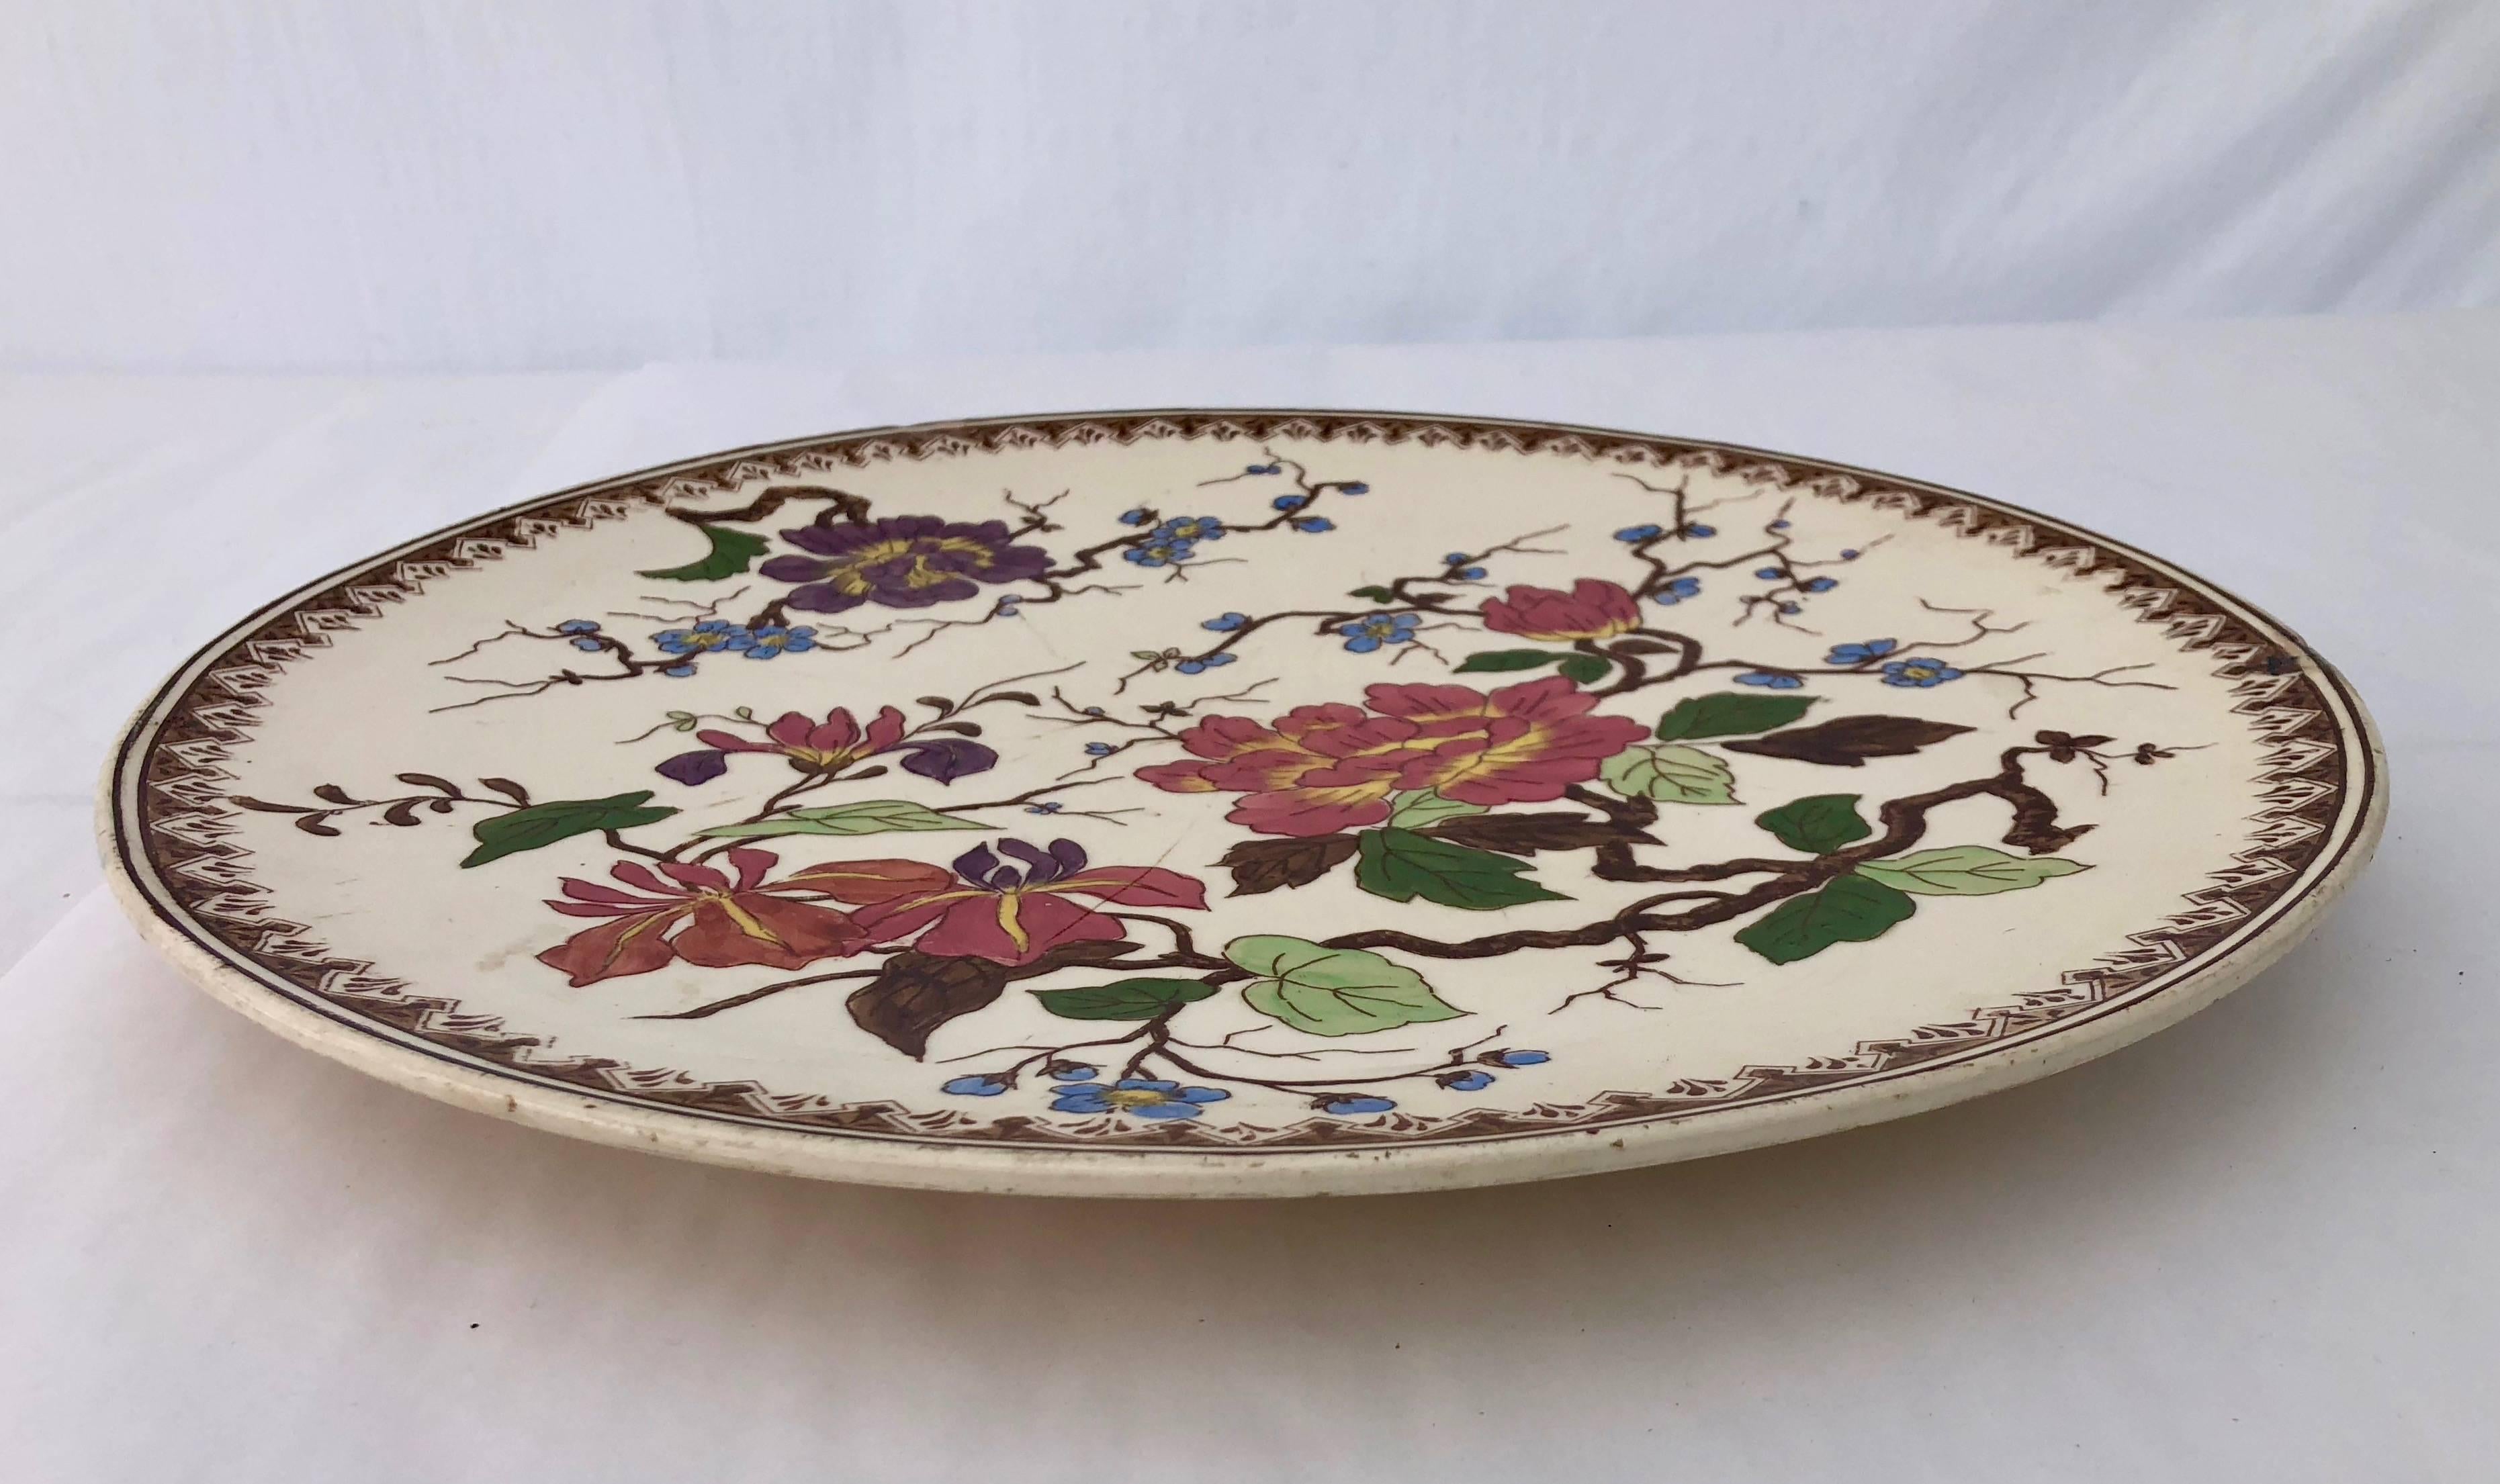 This is a beautiful round porcelain Imari platter with a hand painted floral design. The colors are vibrant pink, greens, brown, purple and blue. It has a small pedestal which gives the platter a built in lift for better presentation.